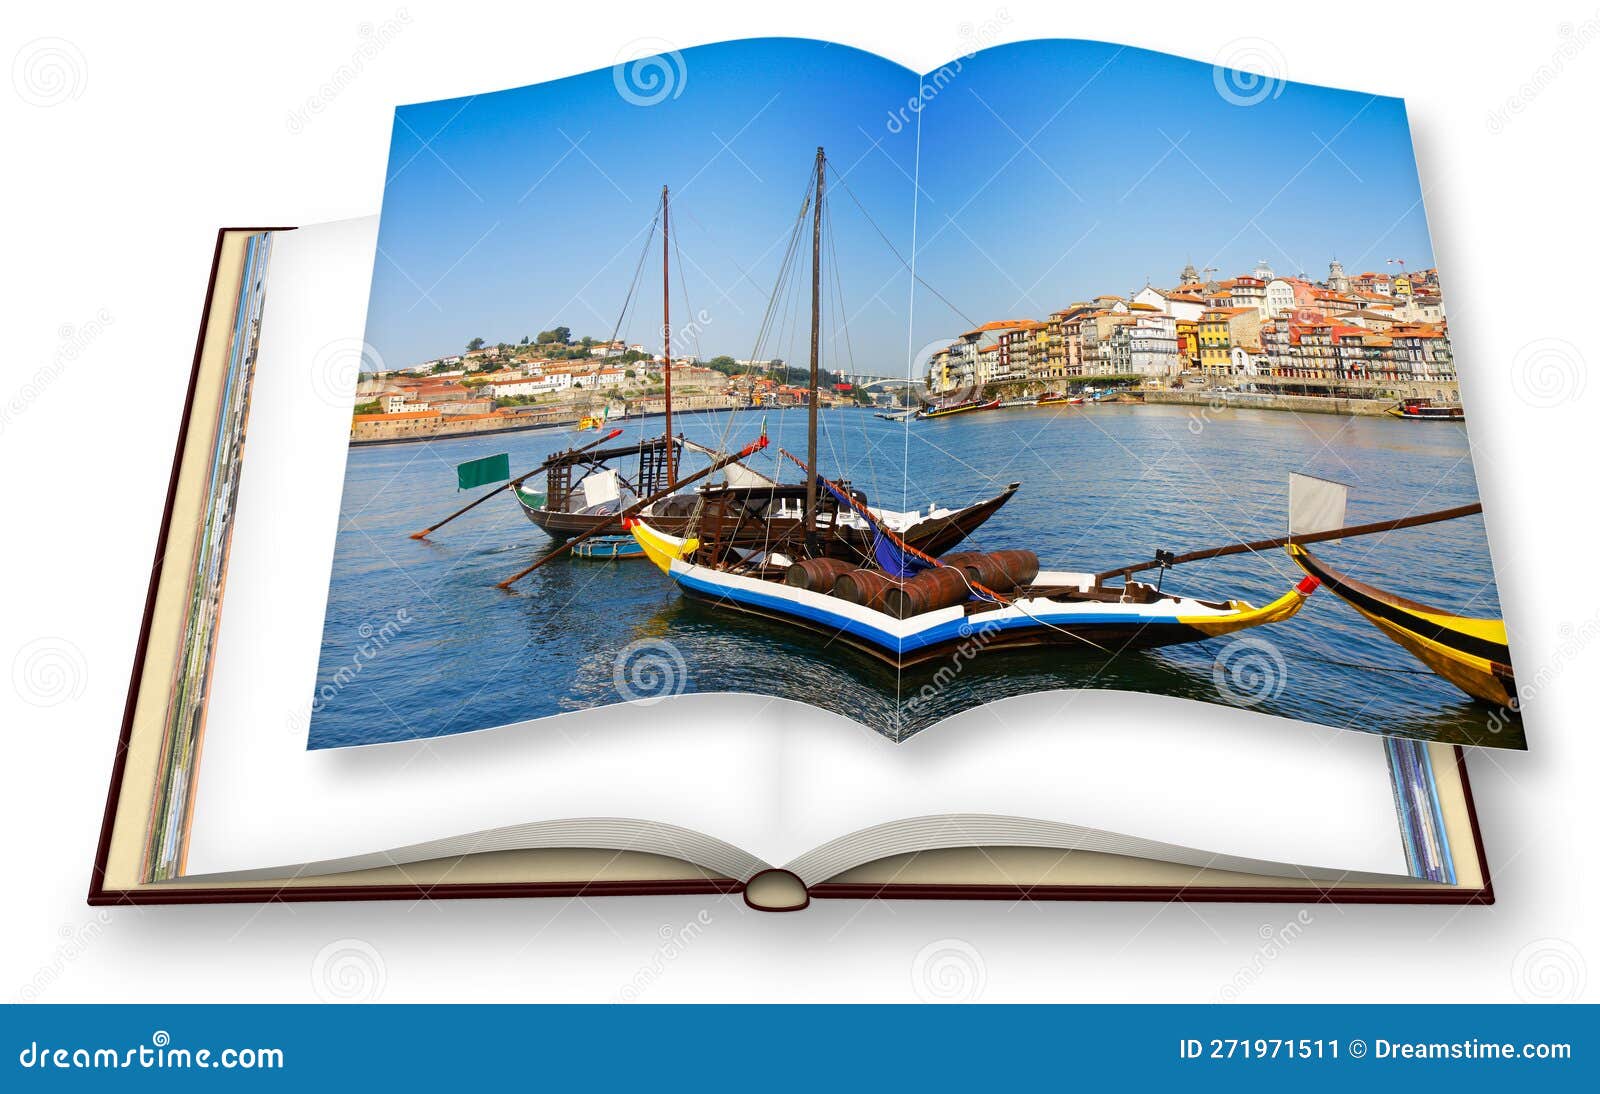 typical portuguese wooden boats, called barcos rabelos, used in the past to transport the famous port wine